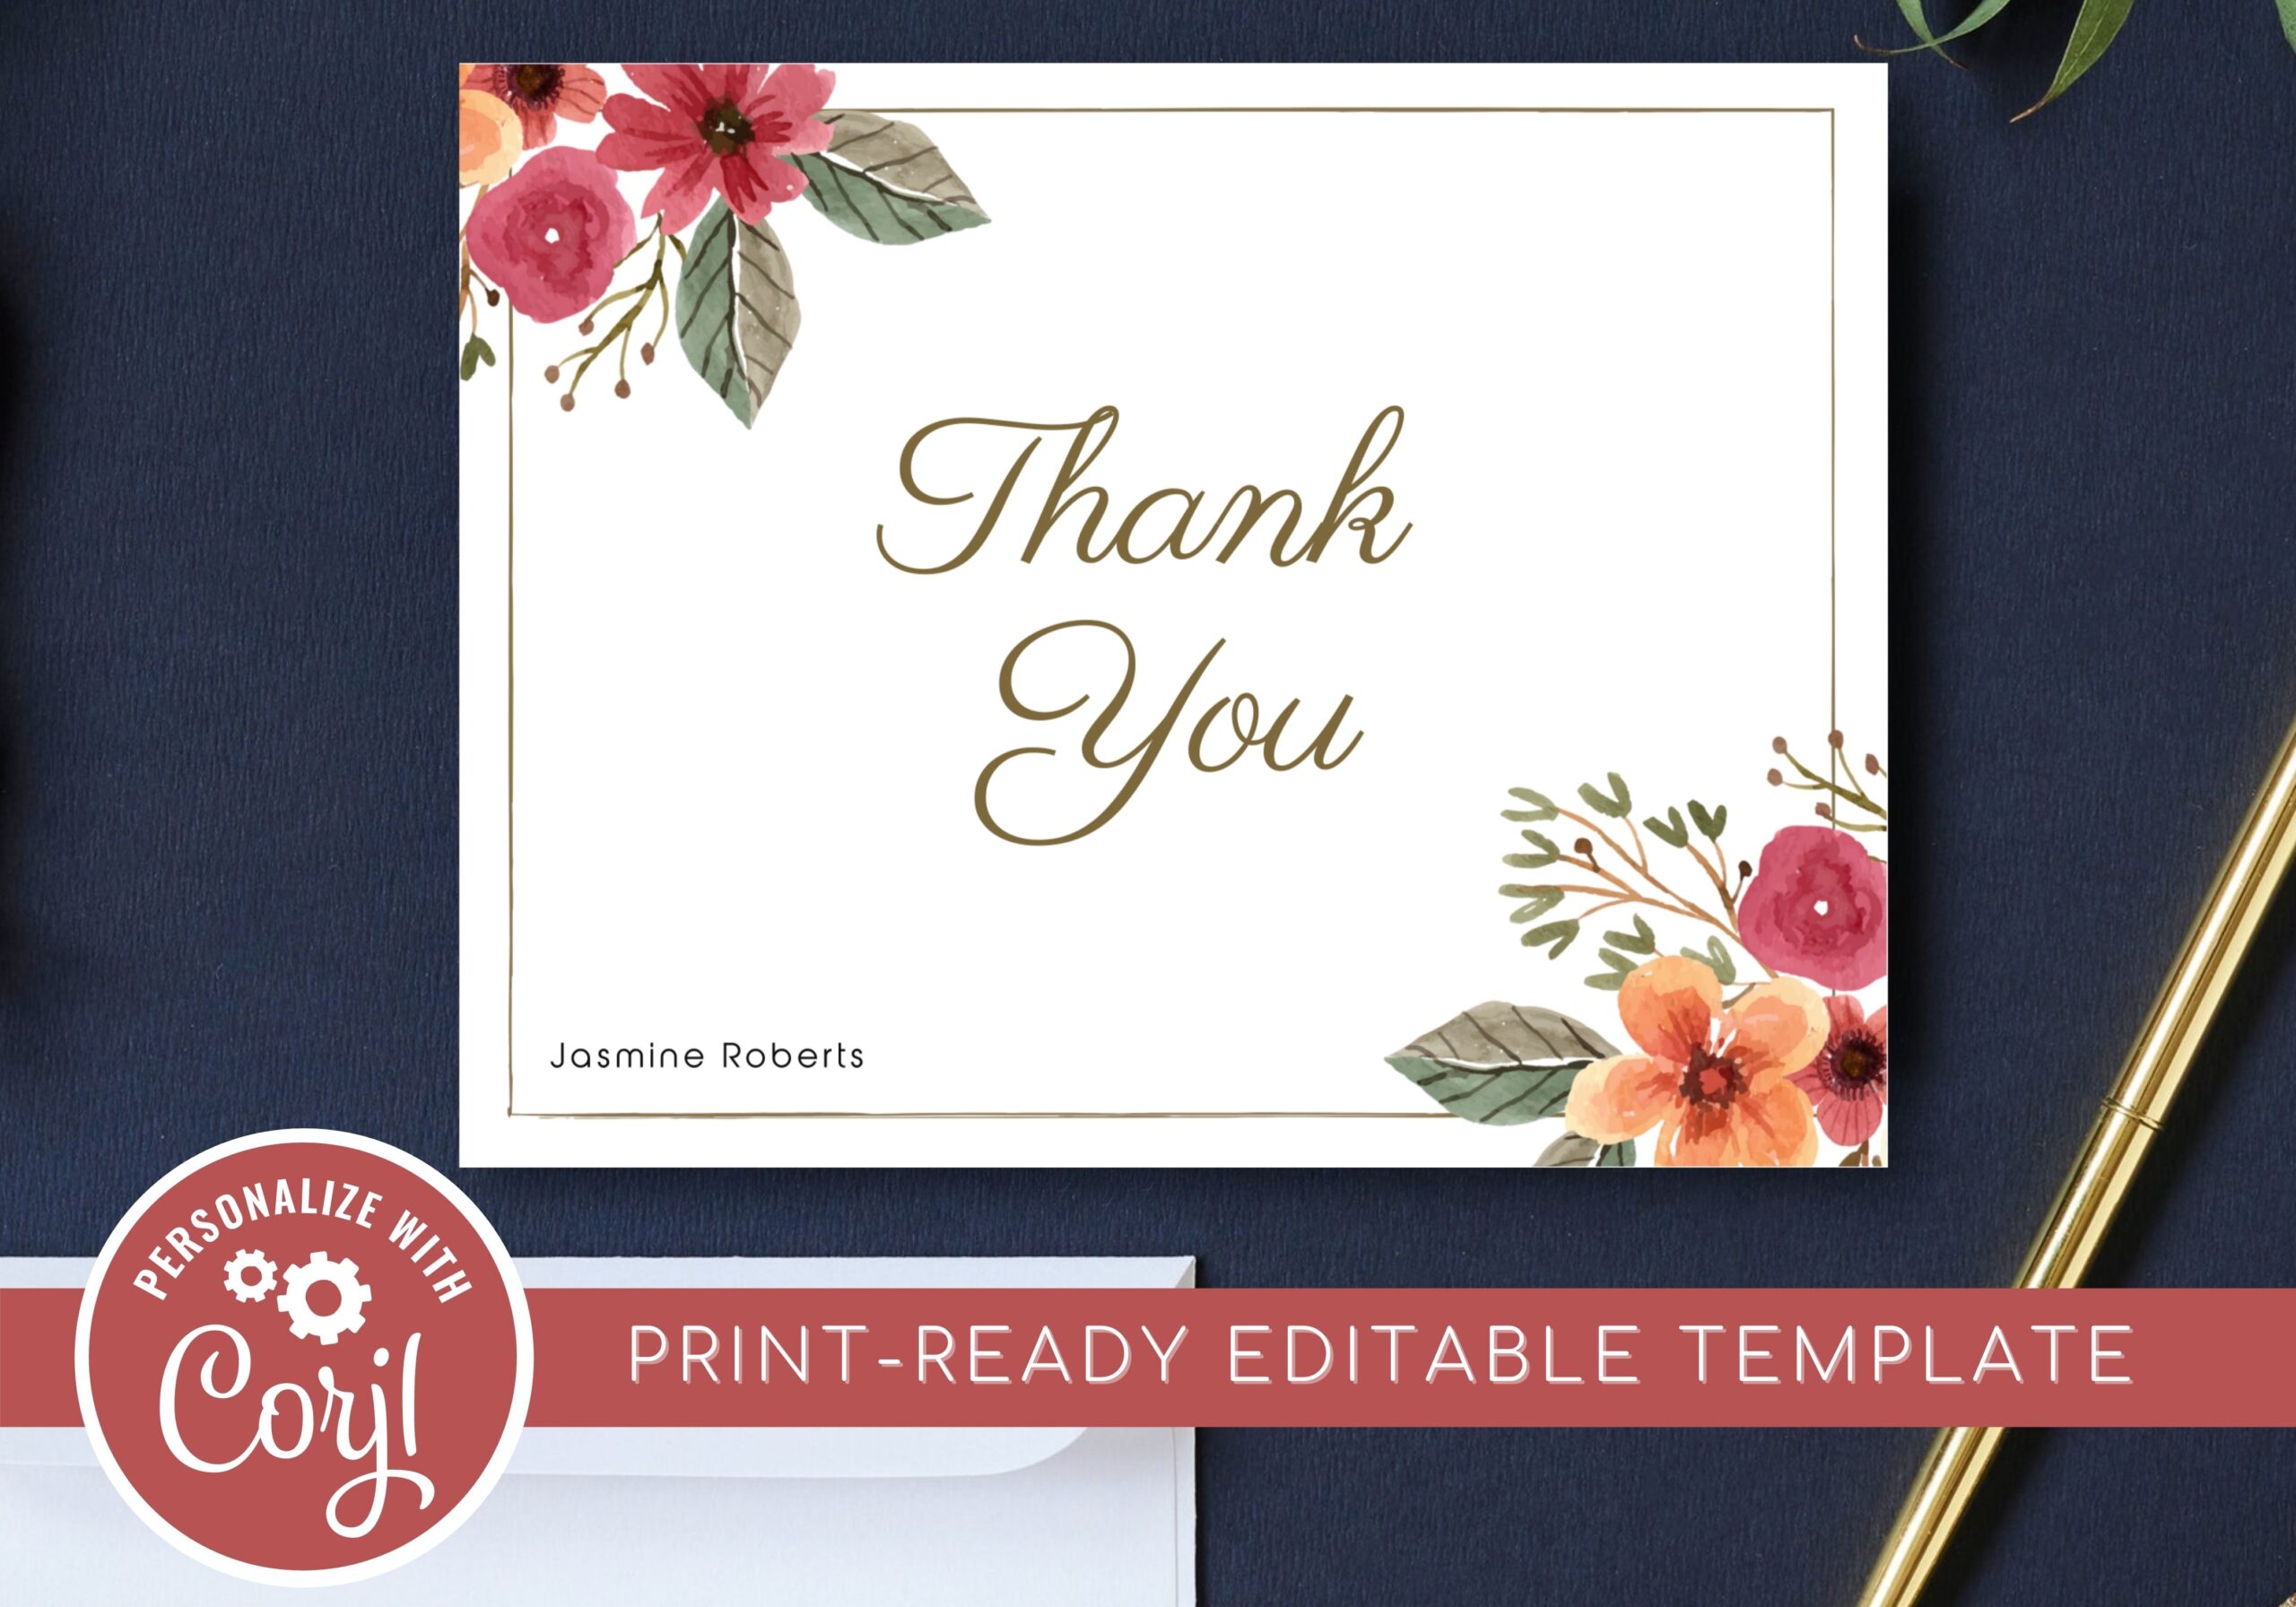 Editable Thank You Card Template, Print-Ready High-Quality Design - Thank You for your Order - Business Thank You Card - Instant Download